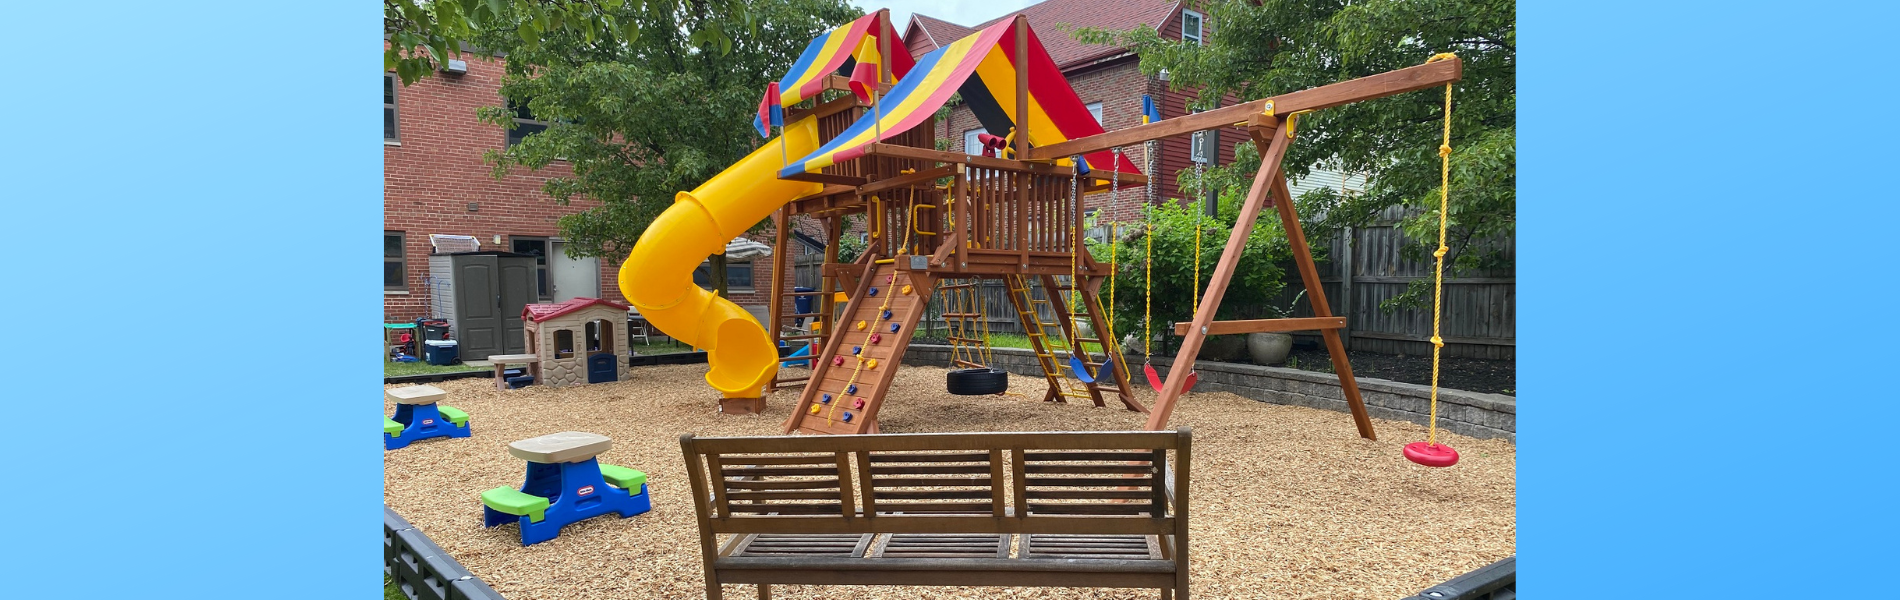 A wood bench sits in the foreground of a multicolored playground